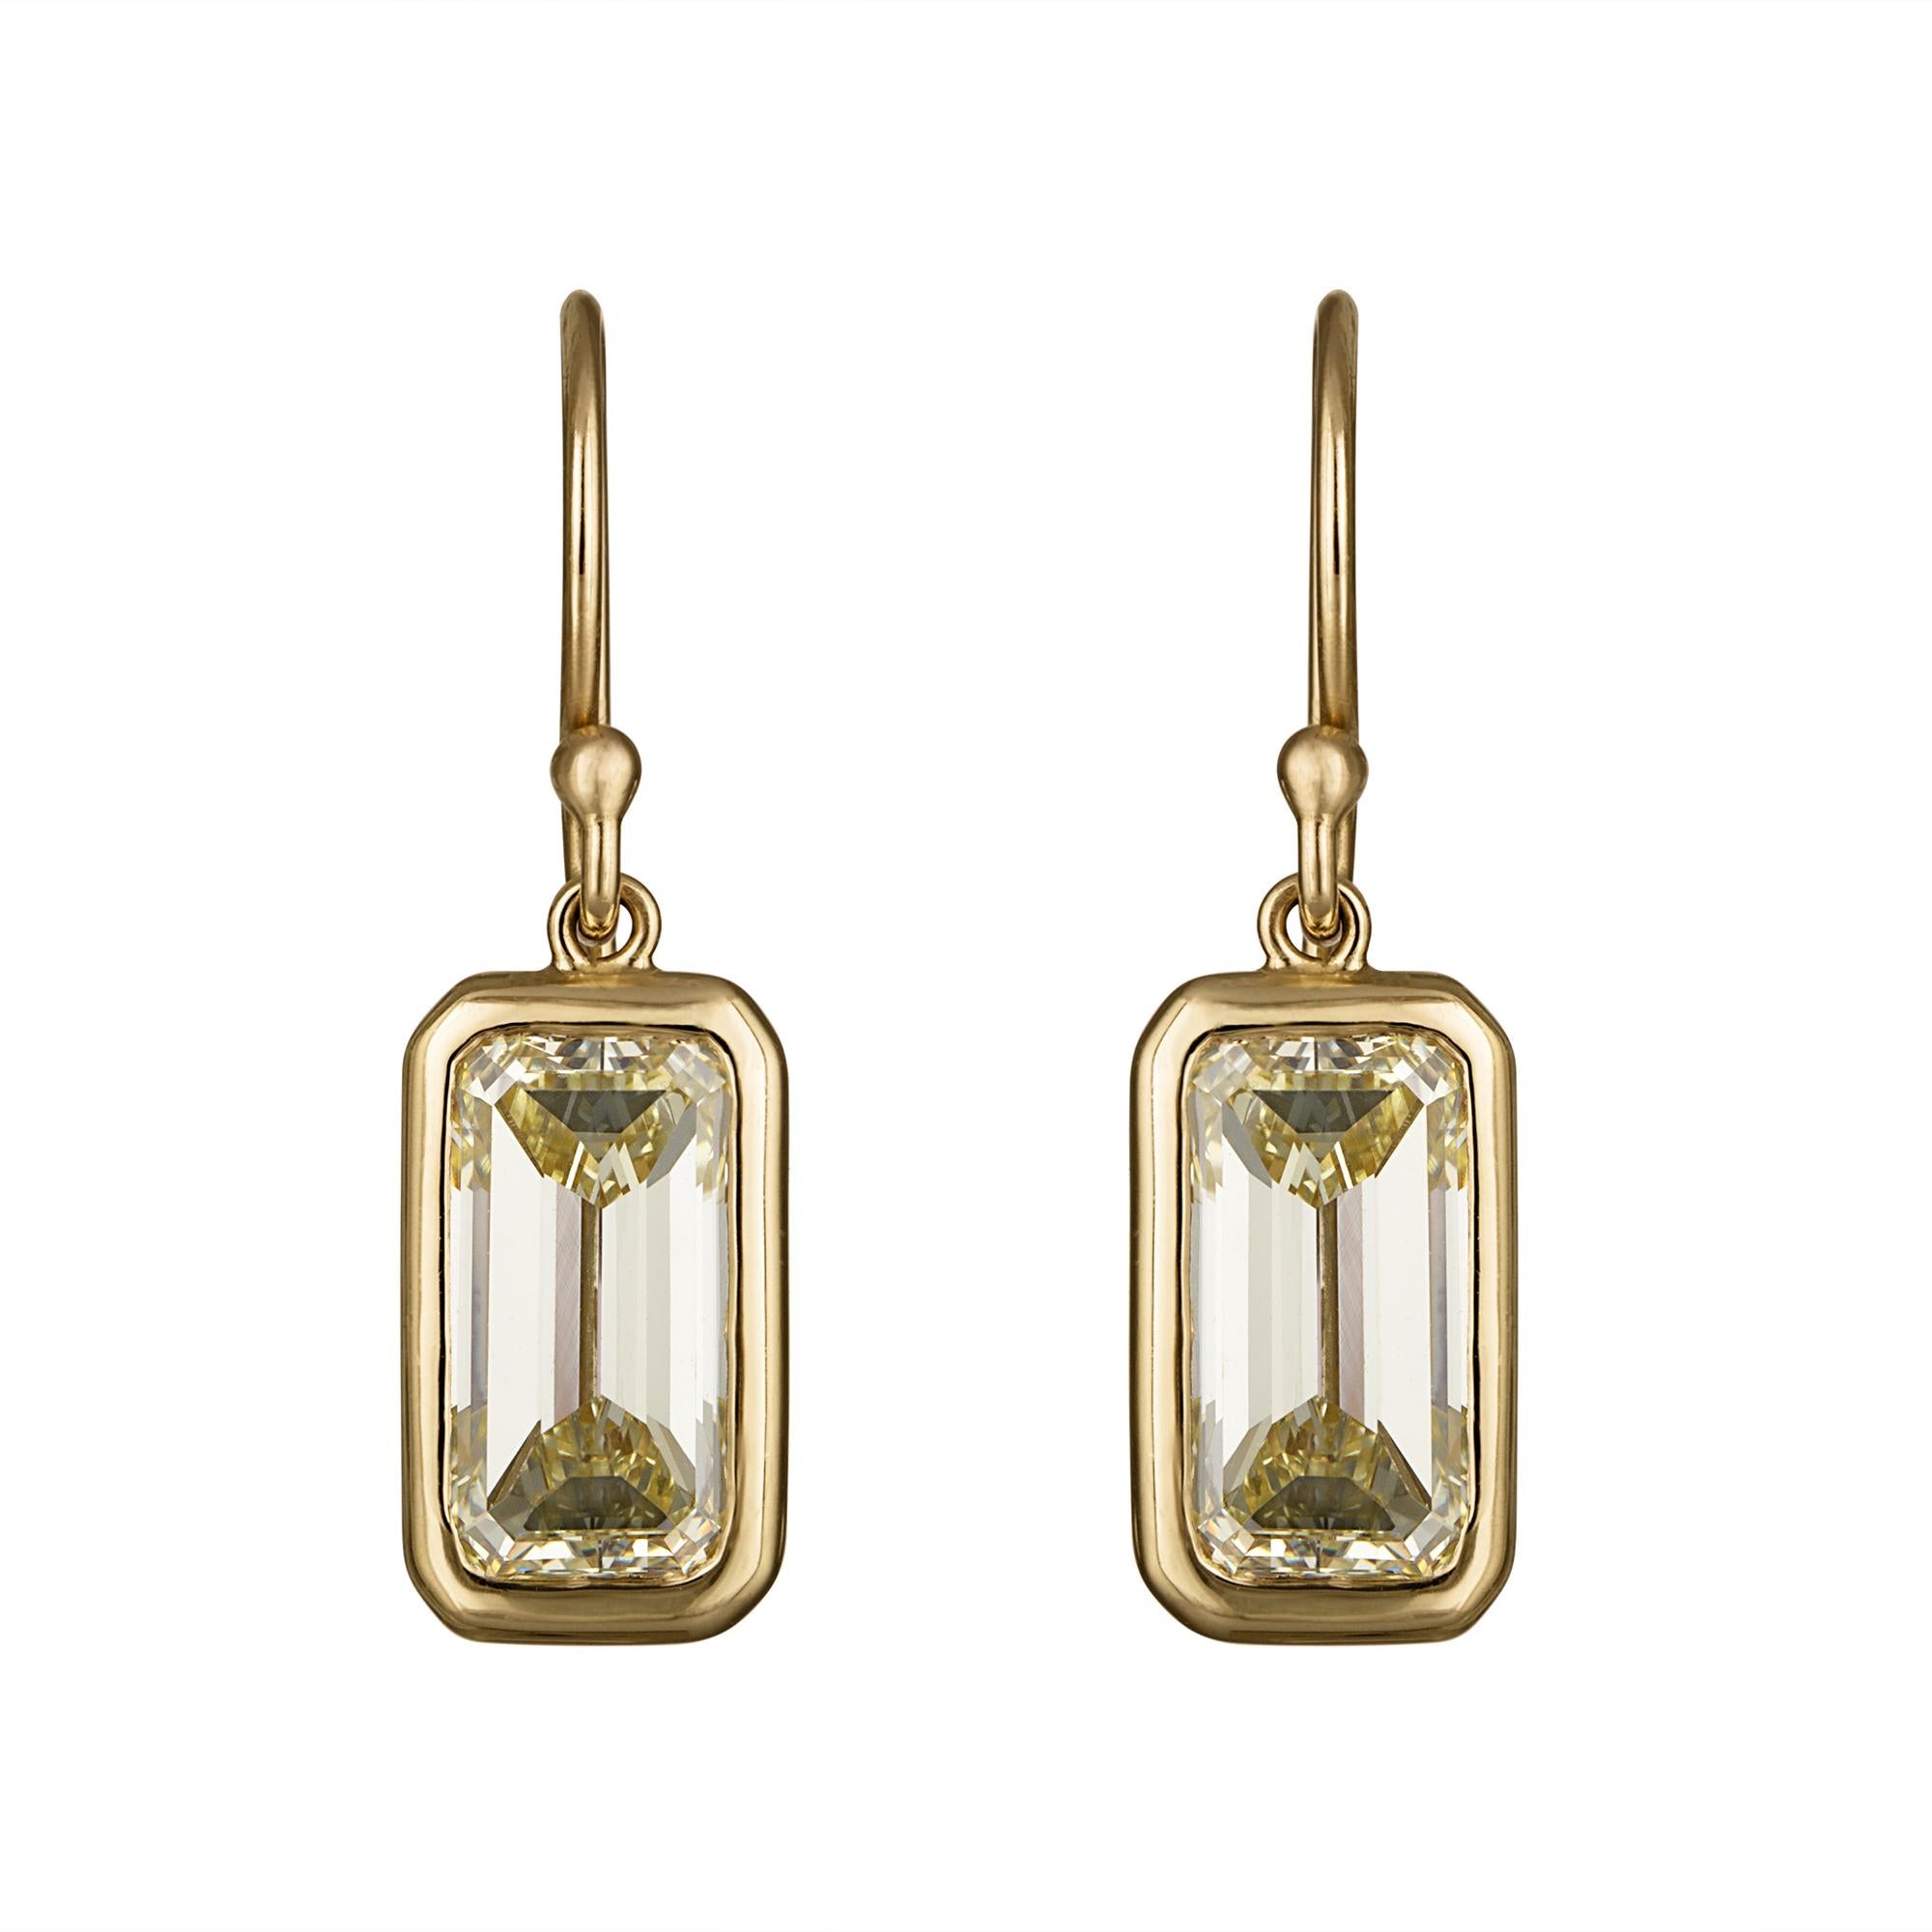 Sunshine on your ears !!! Impressive 18k 4.0ct Solitaire Diamond Drop Earrings in Emerald Cut .

One accessory that has never gone out of style is the solitaire diamond earrings add a rare fancy yellow color and you got a killer look!...These